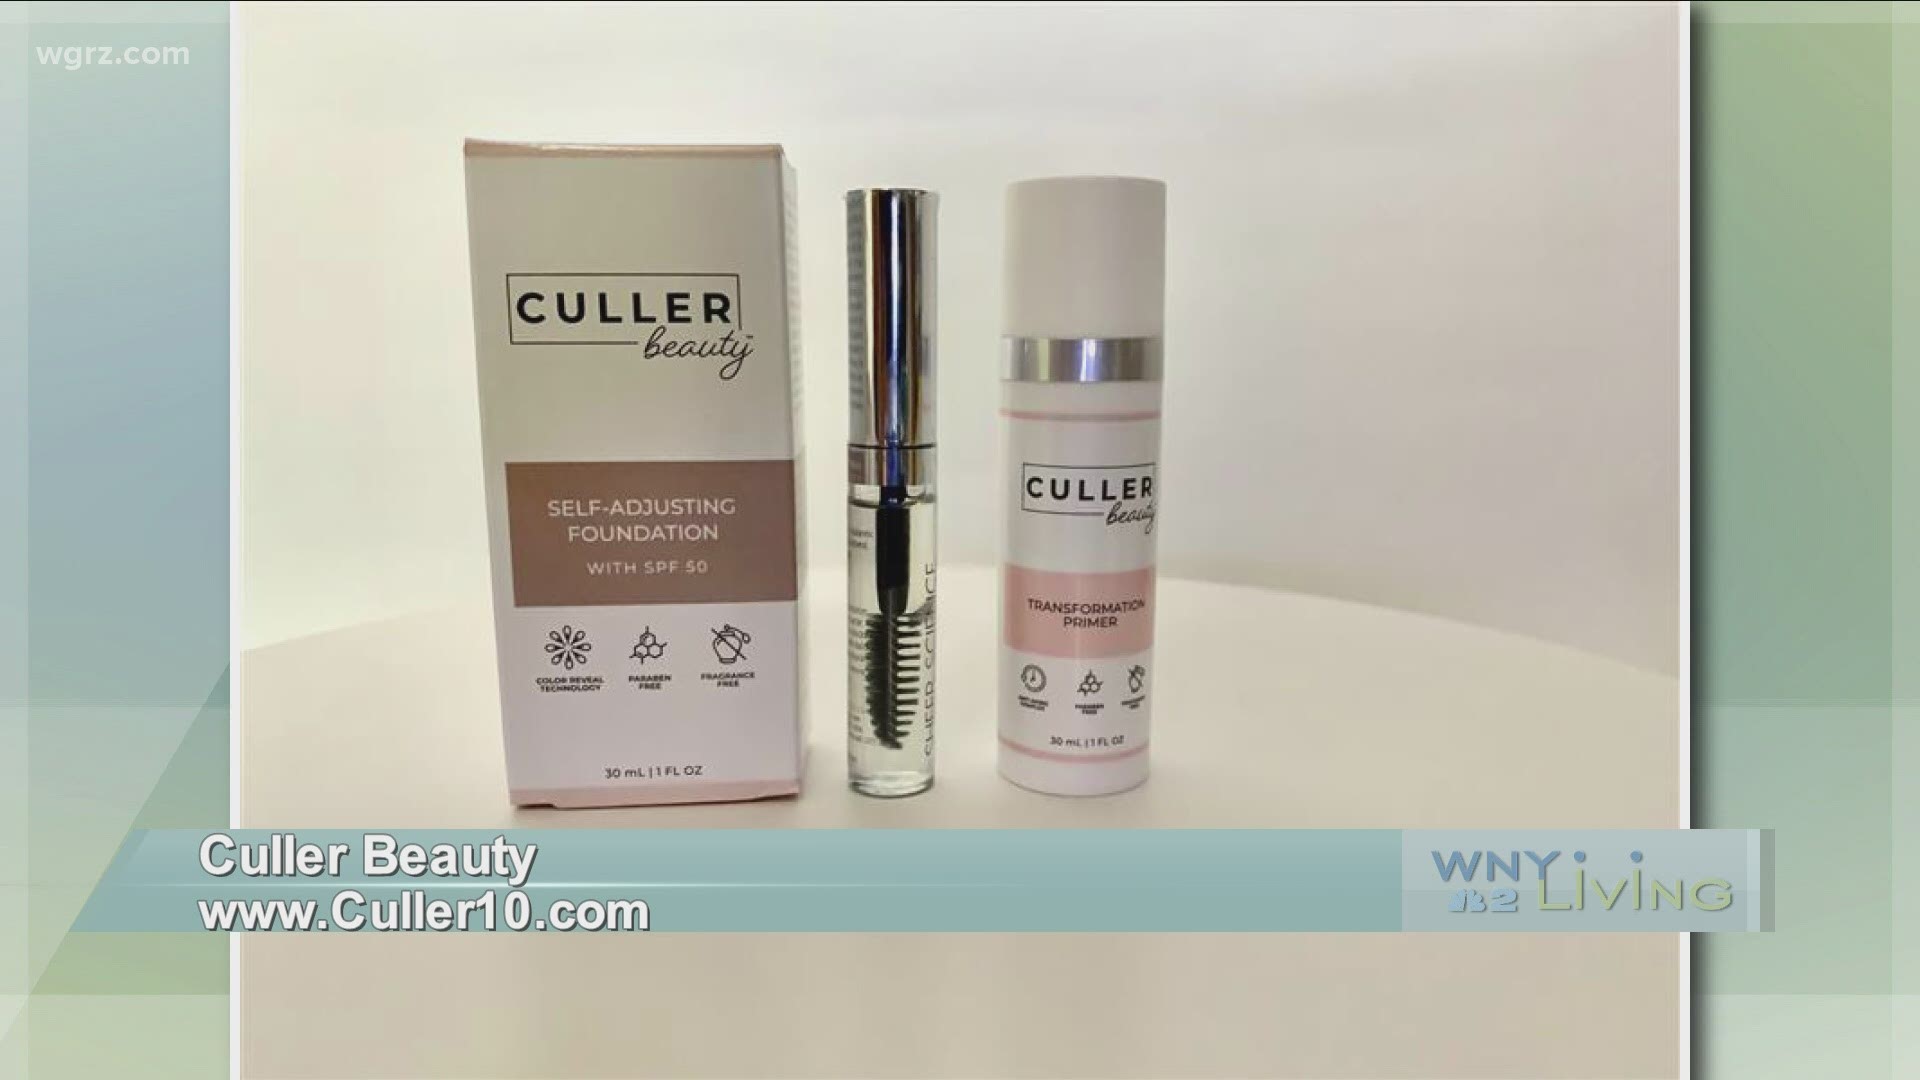 WNY Living - March 6 - Culler Beauty (THIS VIDEO IS SPONSORED BY CULLER BEAUTY)